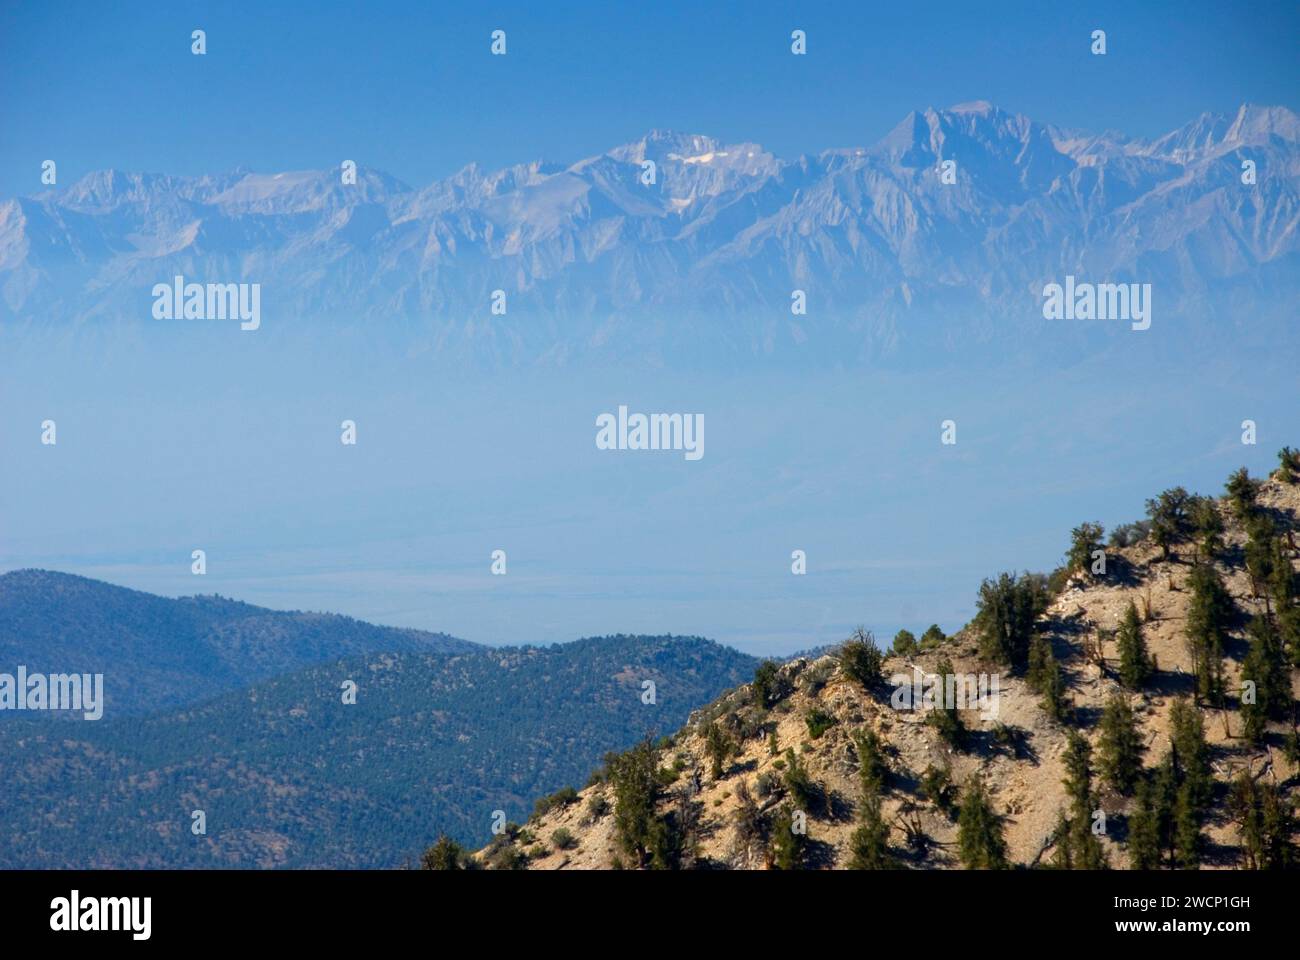 Smog in Owens Valley from Methuselah Walk National Recreation Trail, Ancient Bristlecone Pine Forest, Inyo National Forest, California Stock Photo